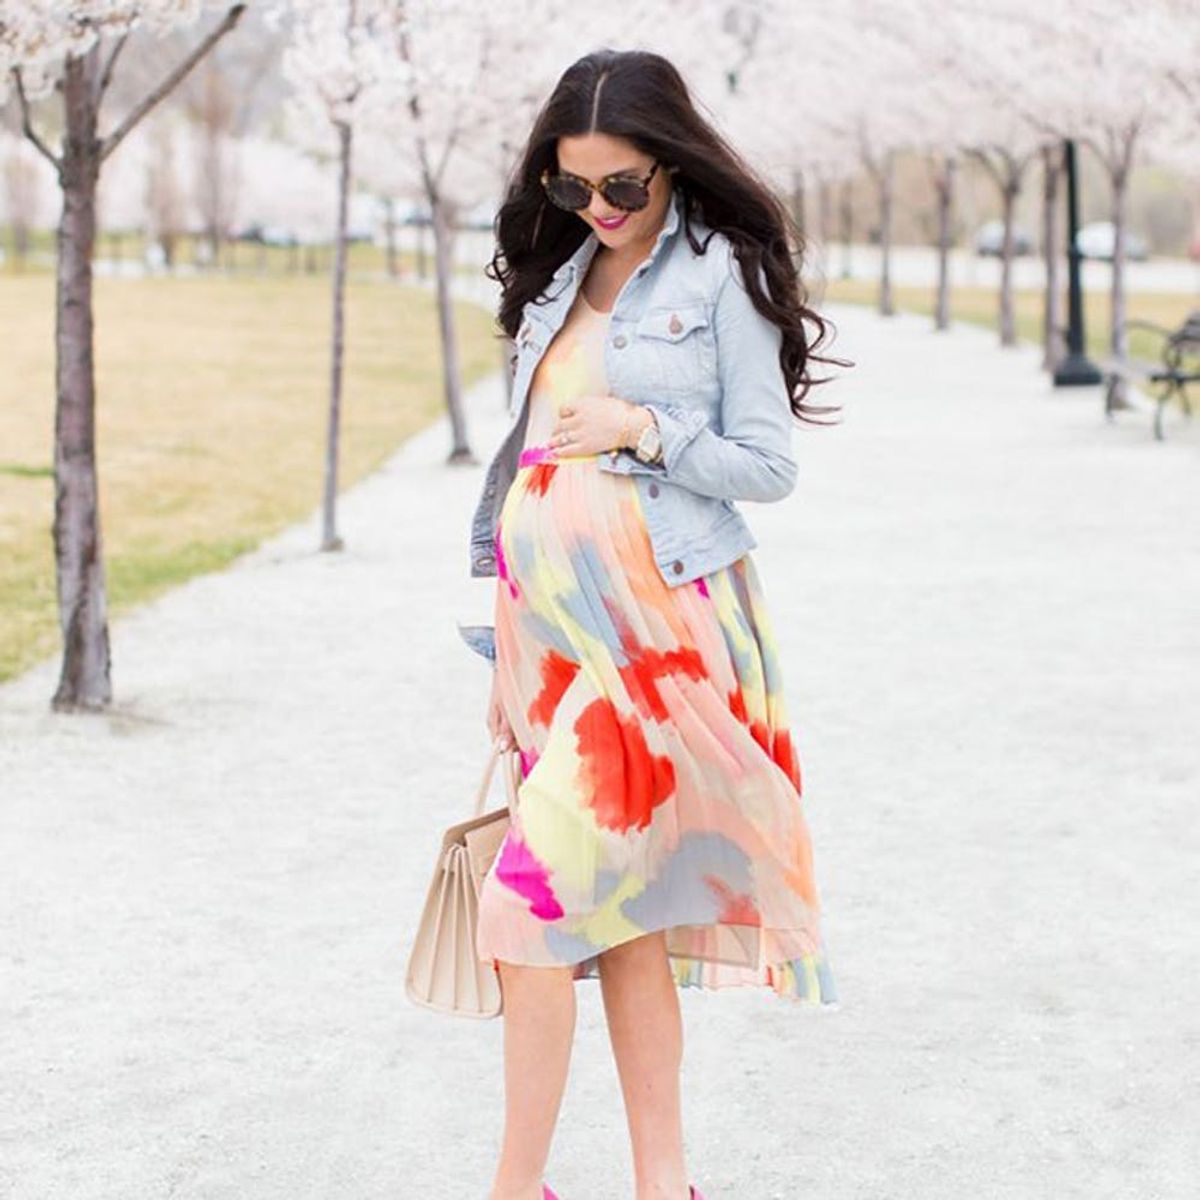 17 Chic Ways to Style Your Bump for the Office